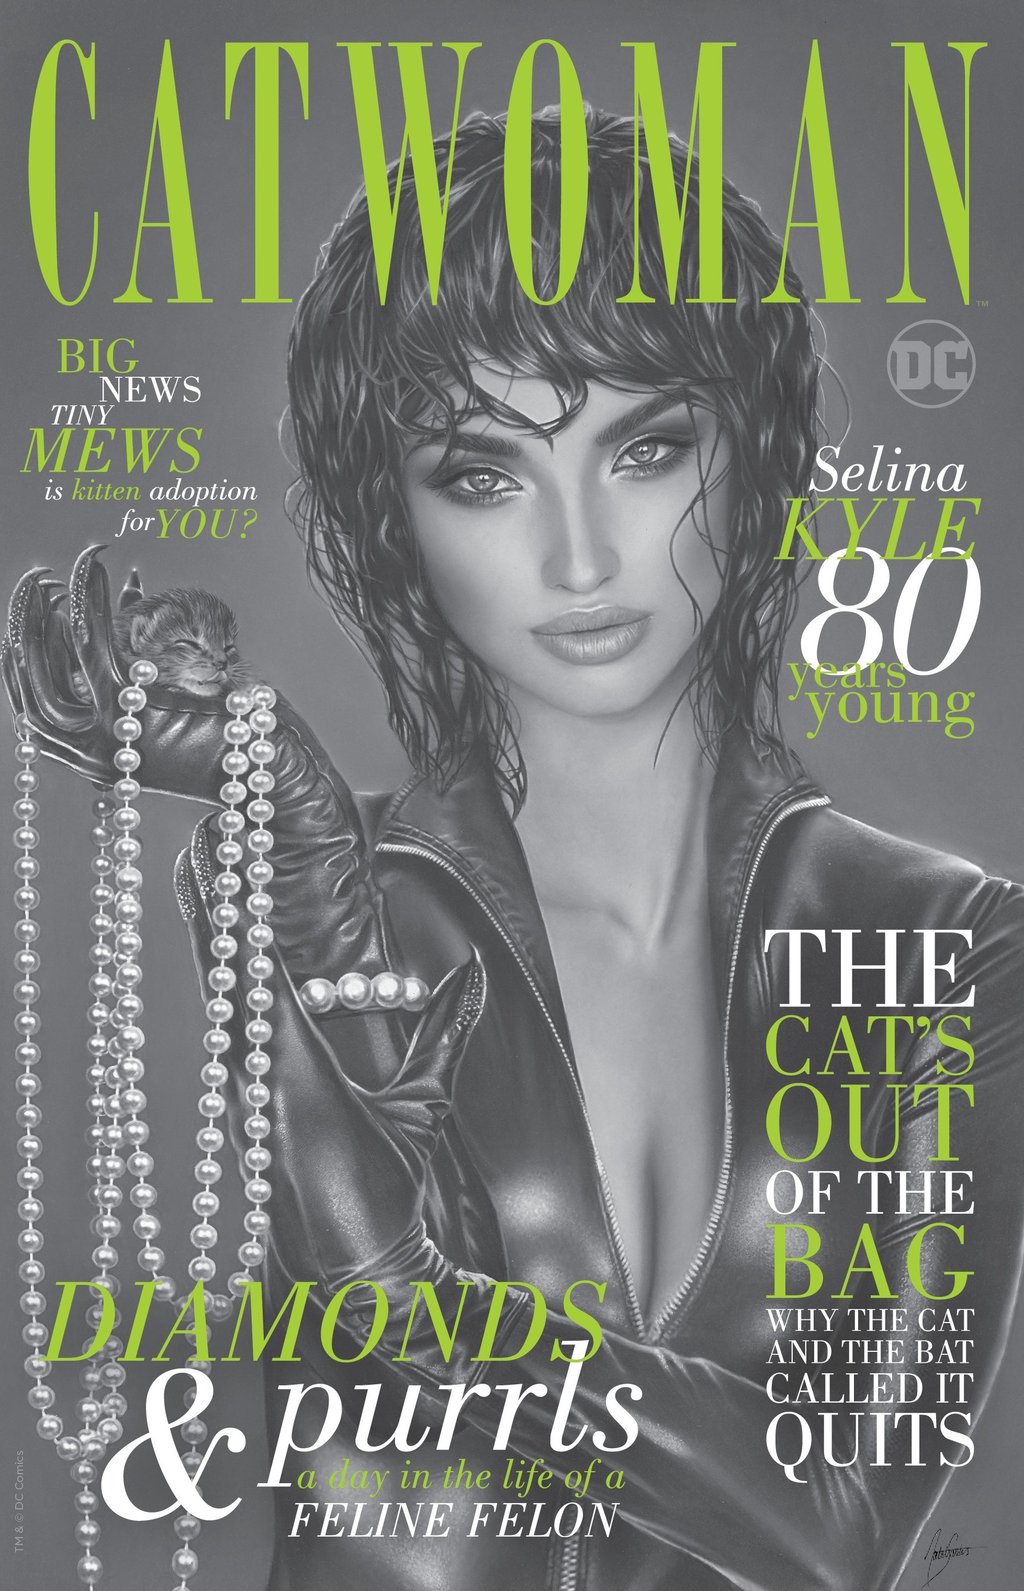 CATWOMAN 80TH ANNIVERSARY SPECIAL NATALI SANDERS SECRET VARIANT